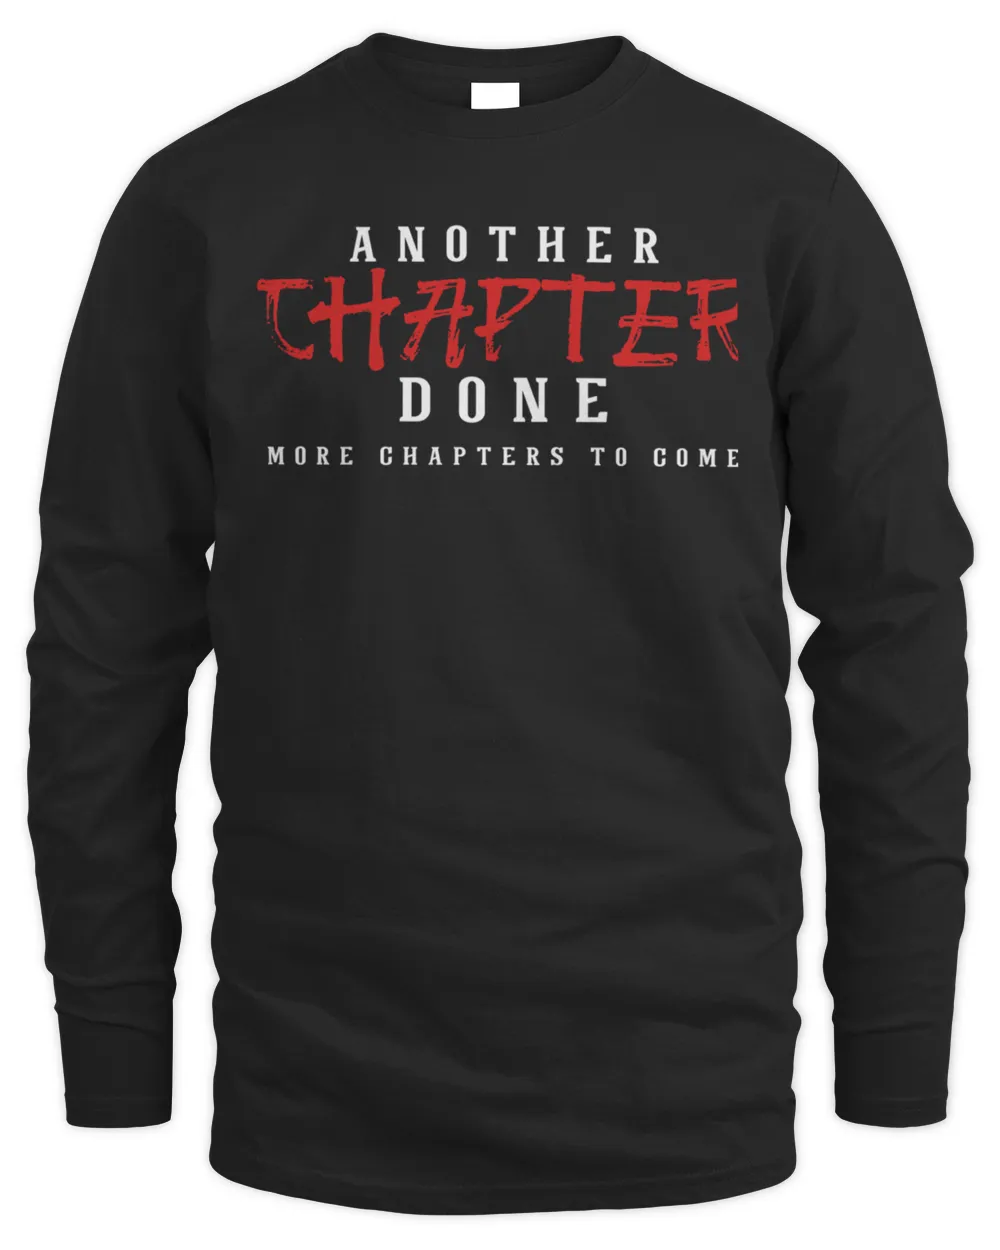 Chapter Done more Chapters to come T-Shirt